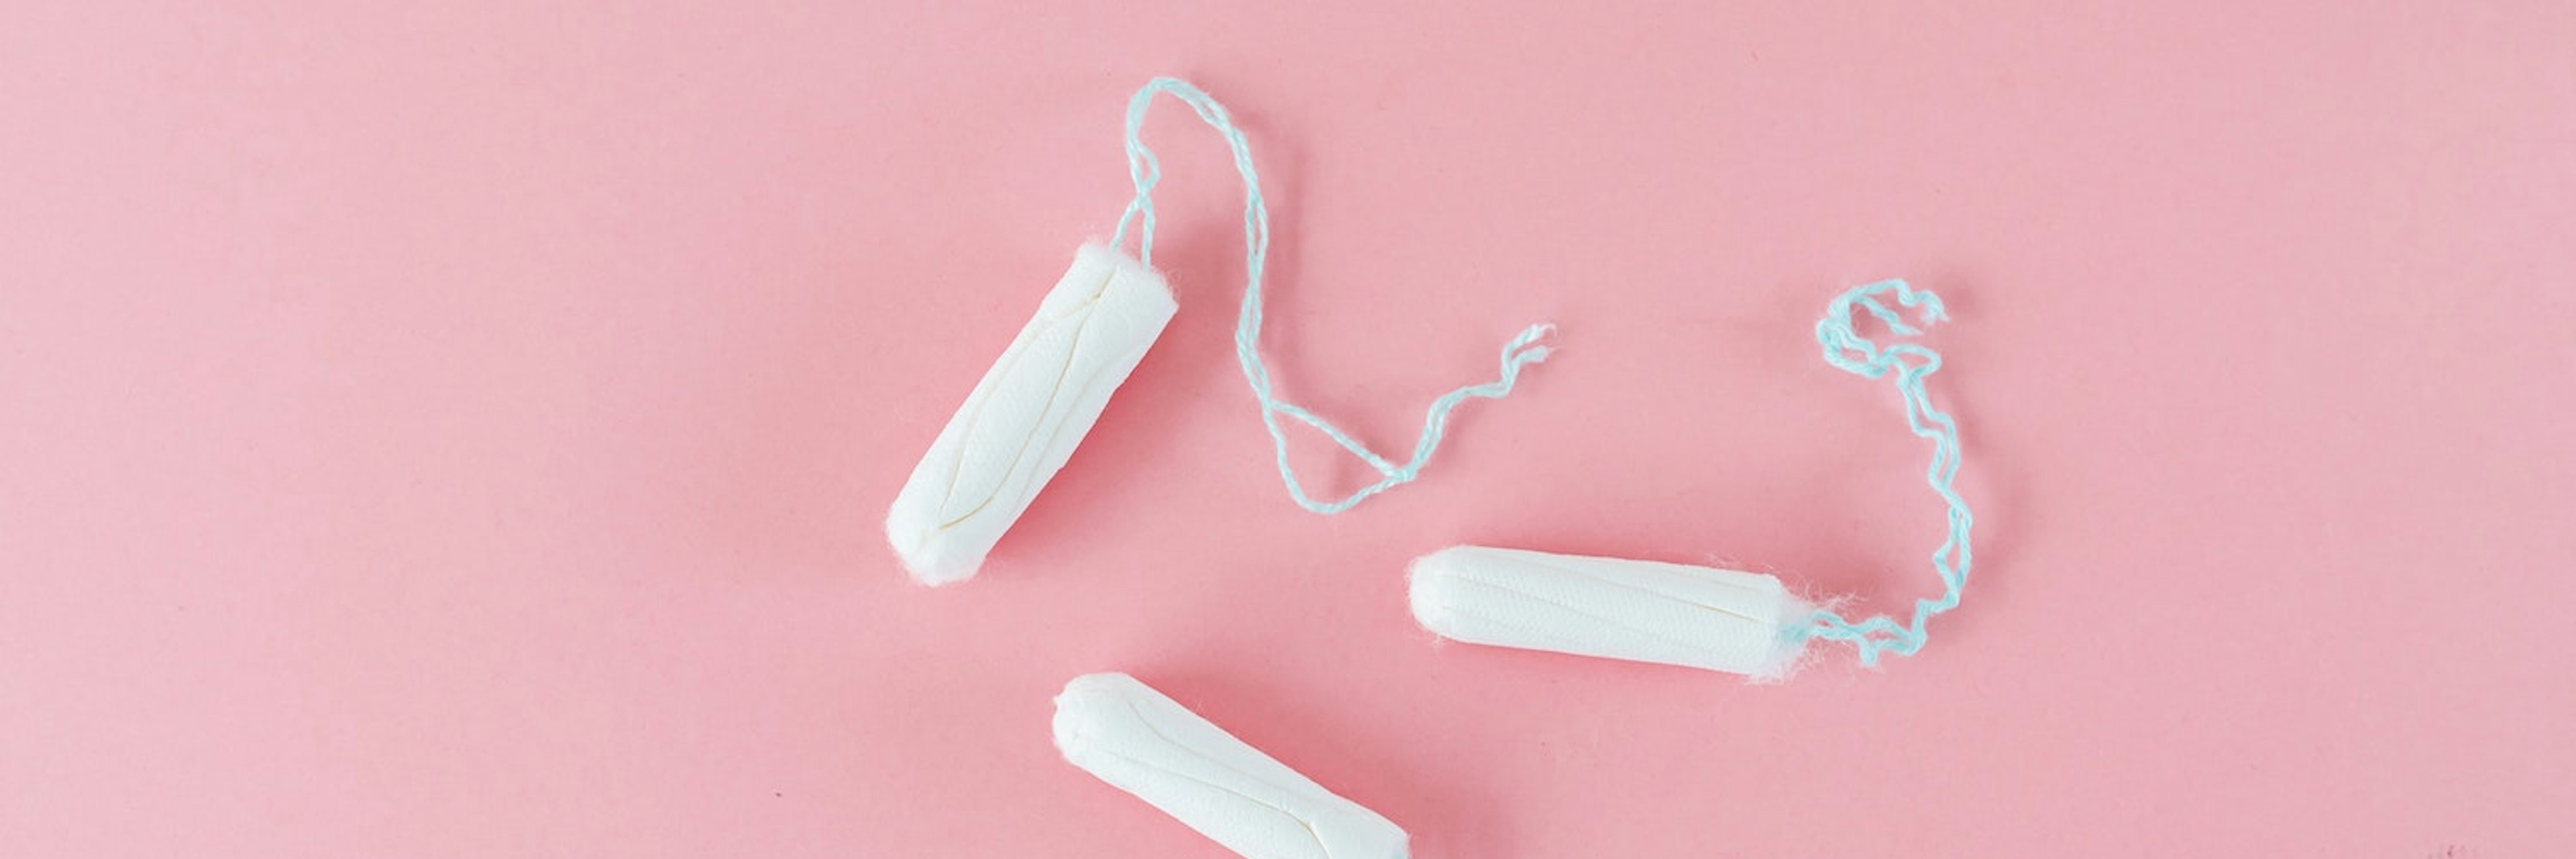 an image of three tampons